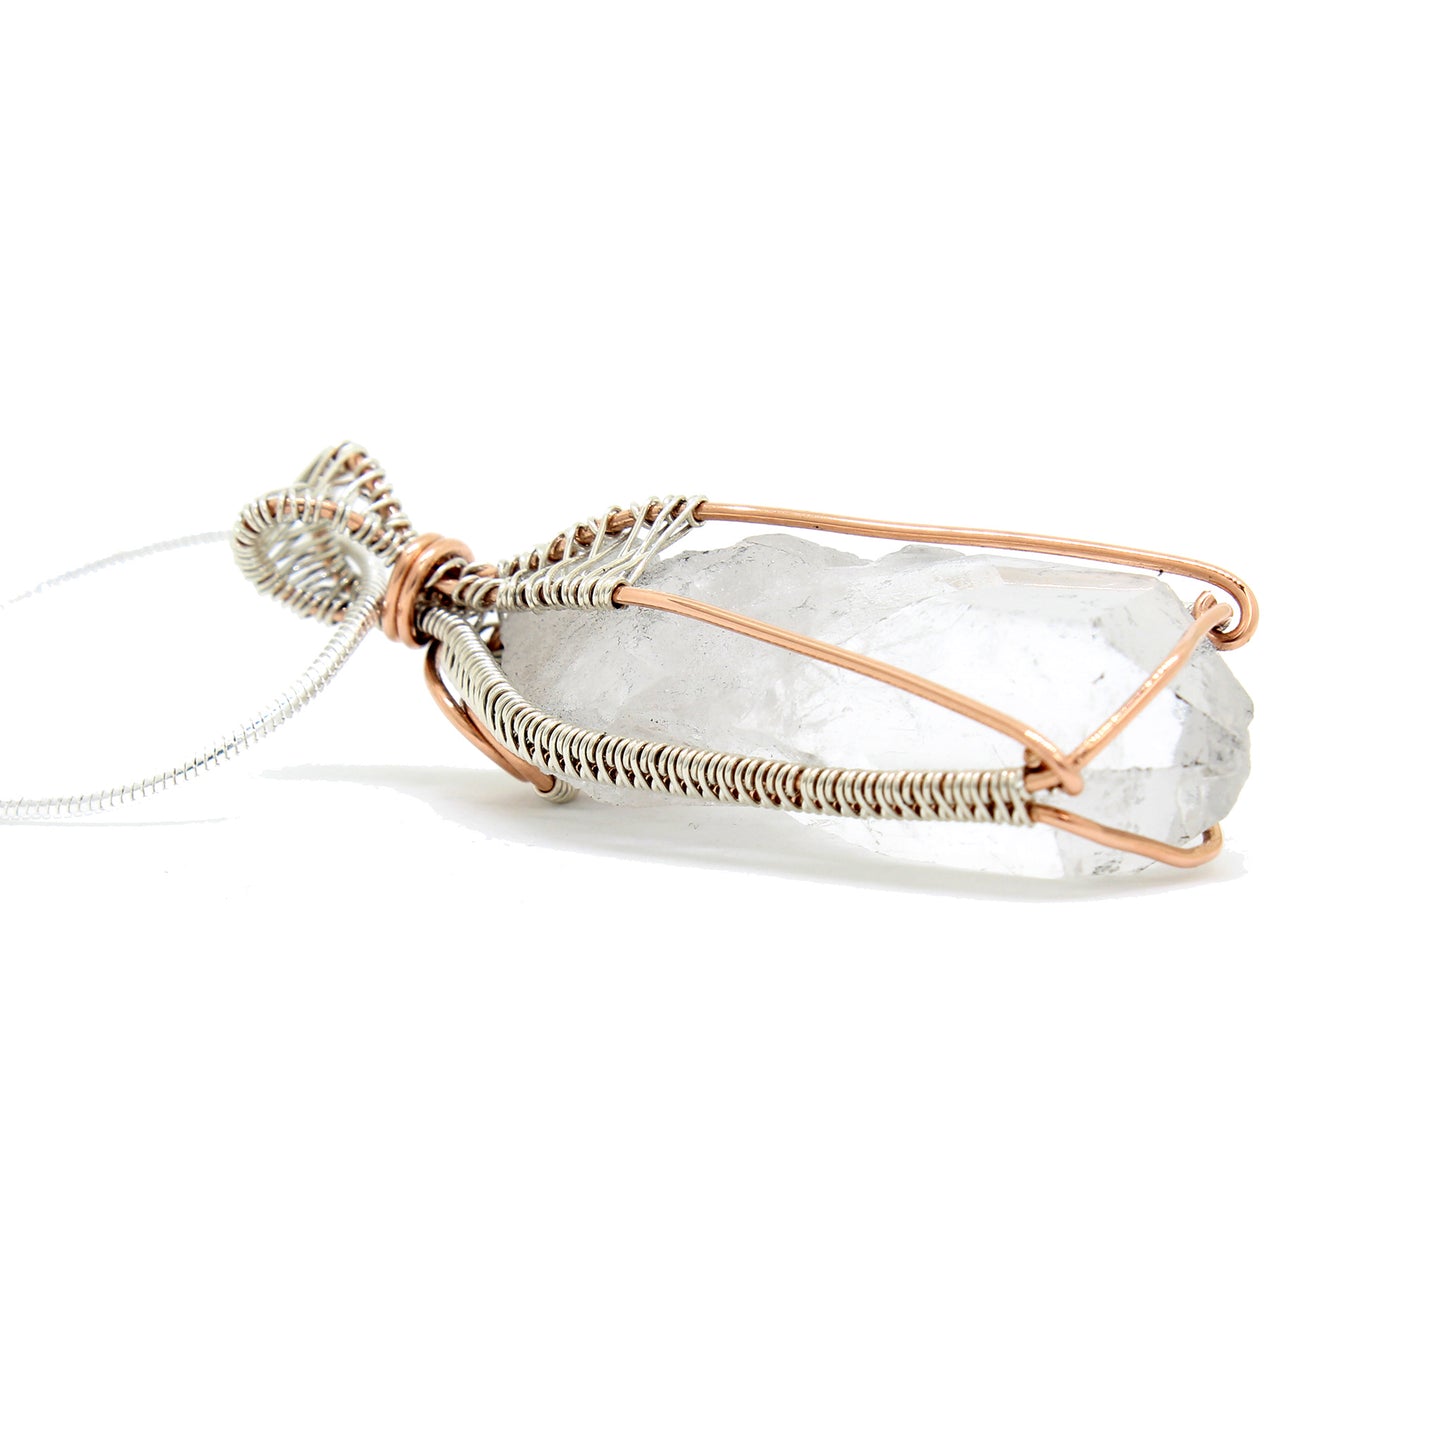 Elegant Clear Quartz Crystal Necklace ~ Sterling Silver and Rose Gold Fill